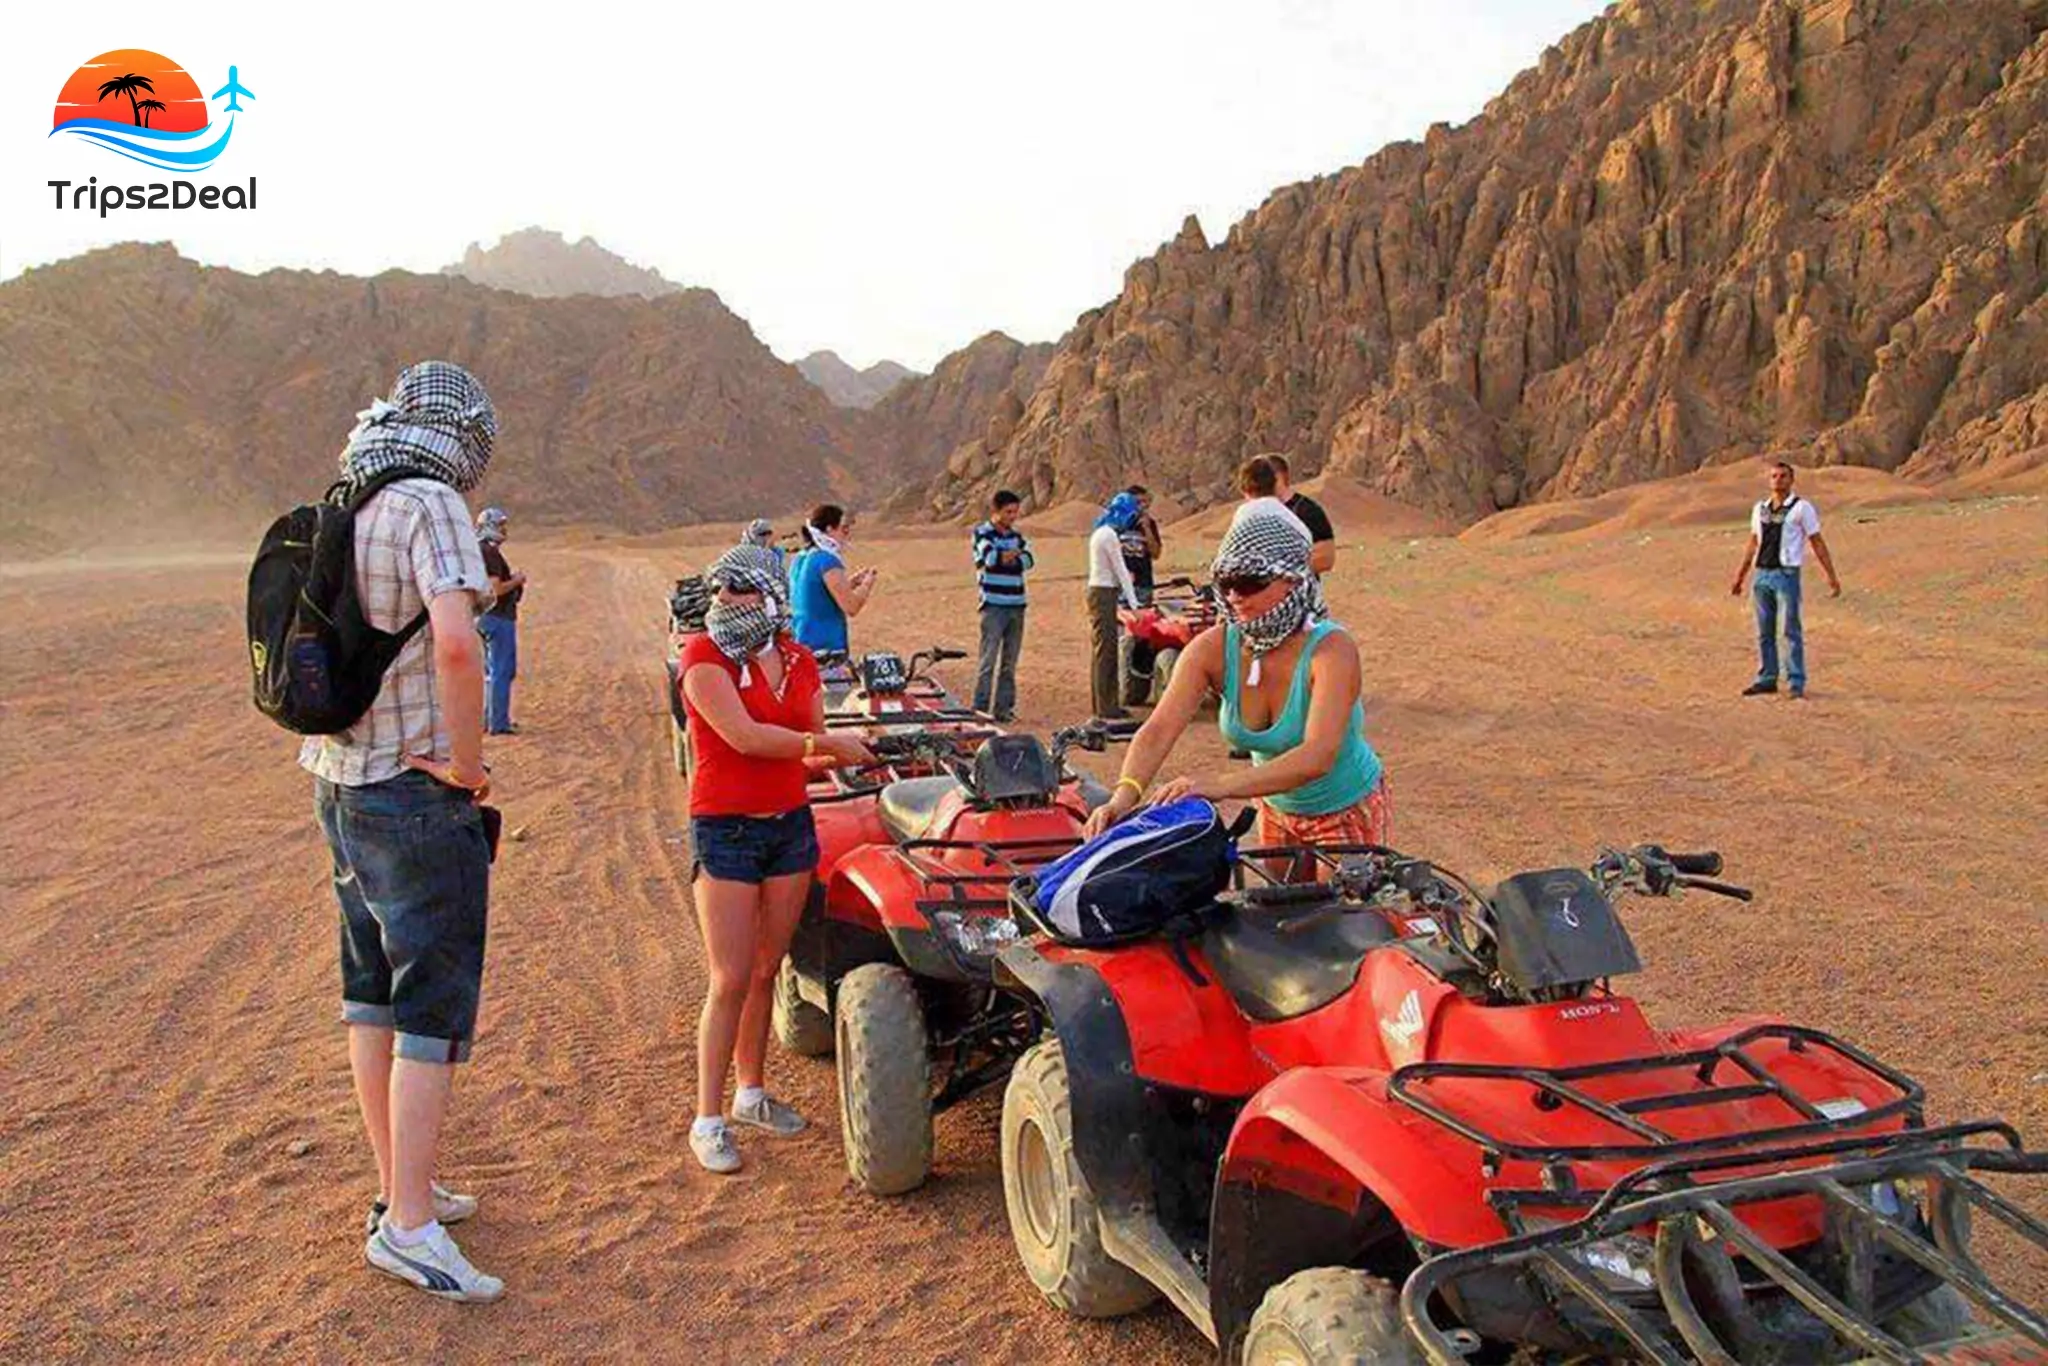 Tour to Bedouin Village and Buggy Desert Ride from Sharm el-Sheikh